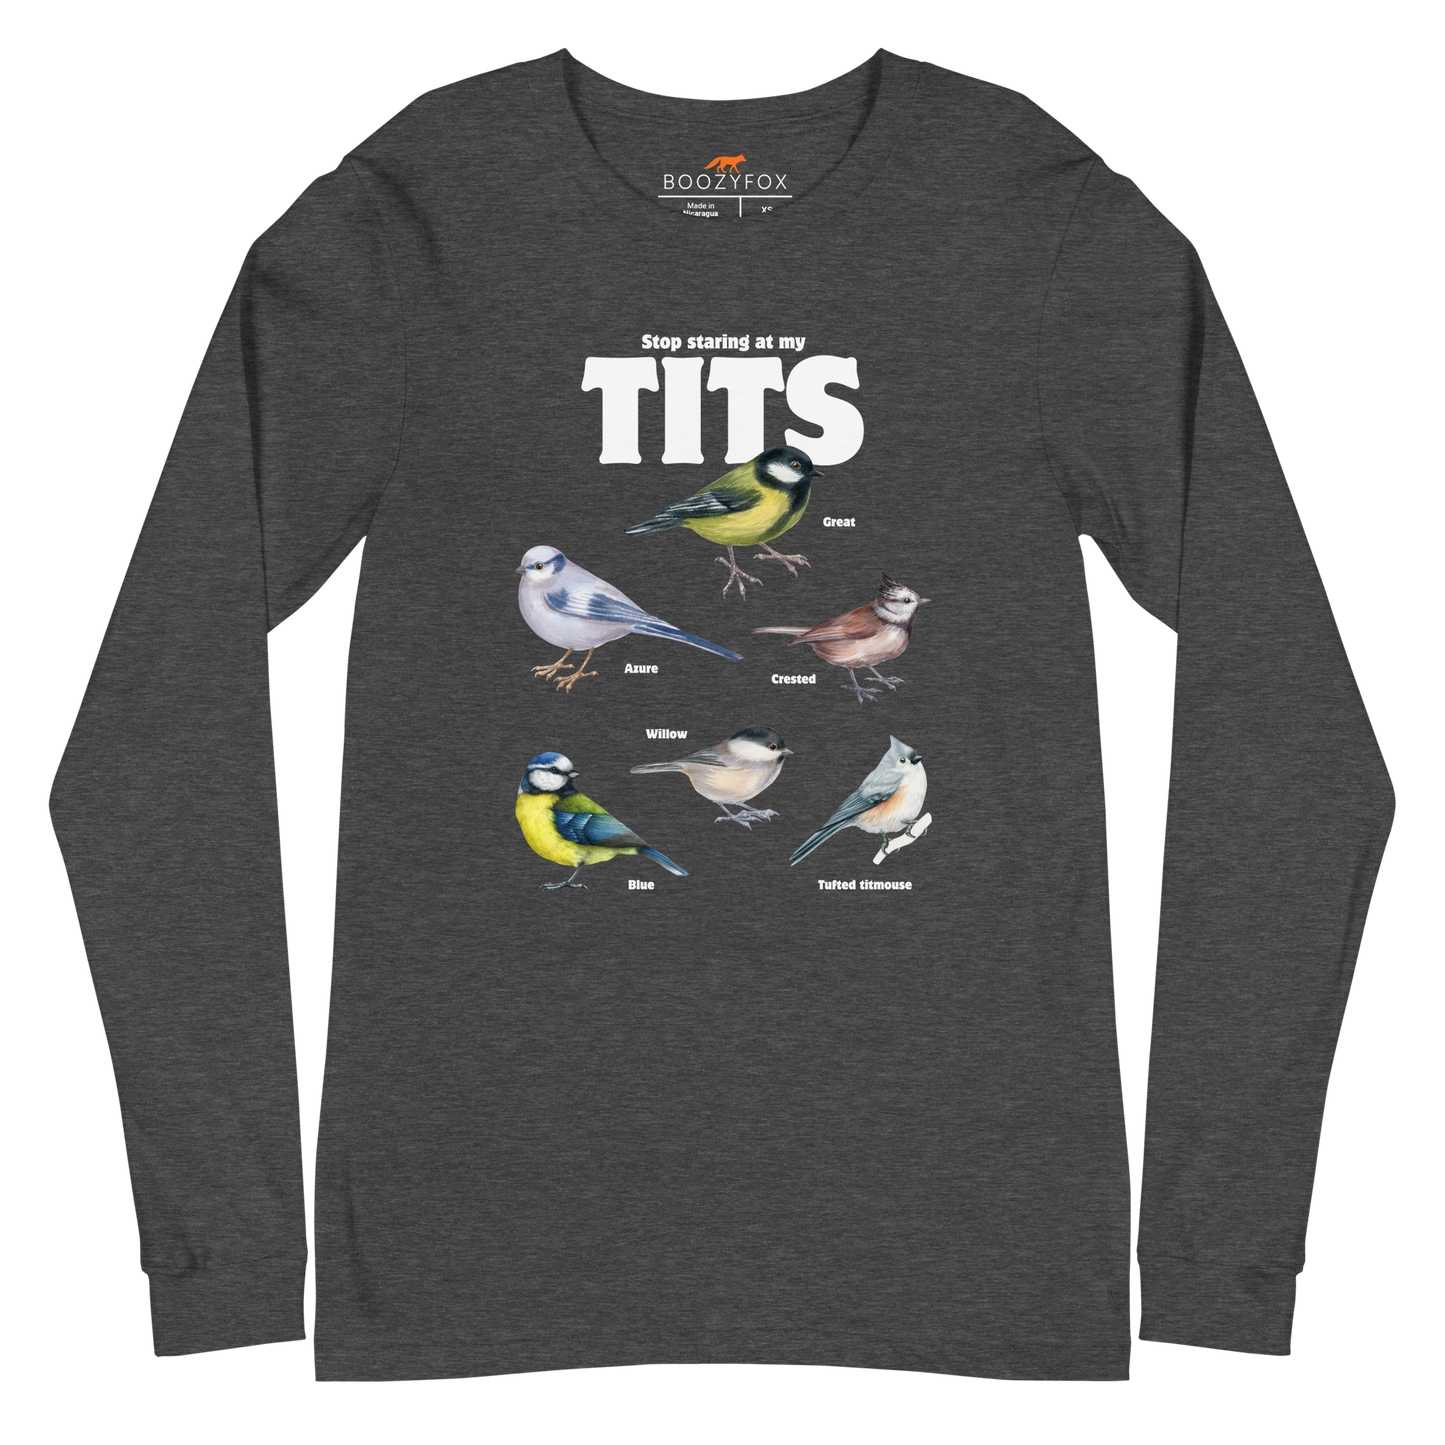 Dark Grey Heather Tit Long Sleeve Tee featuring a funny Stop Staring At My Tits graphic on the chest - Funny Tit Bird Long Sleeve Graphic Tees - Boozy Fox